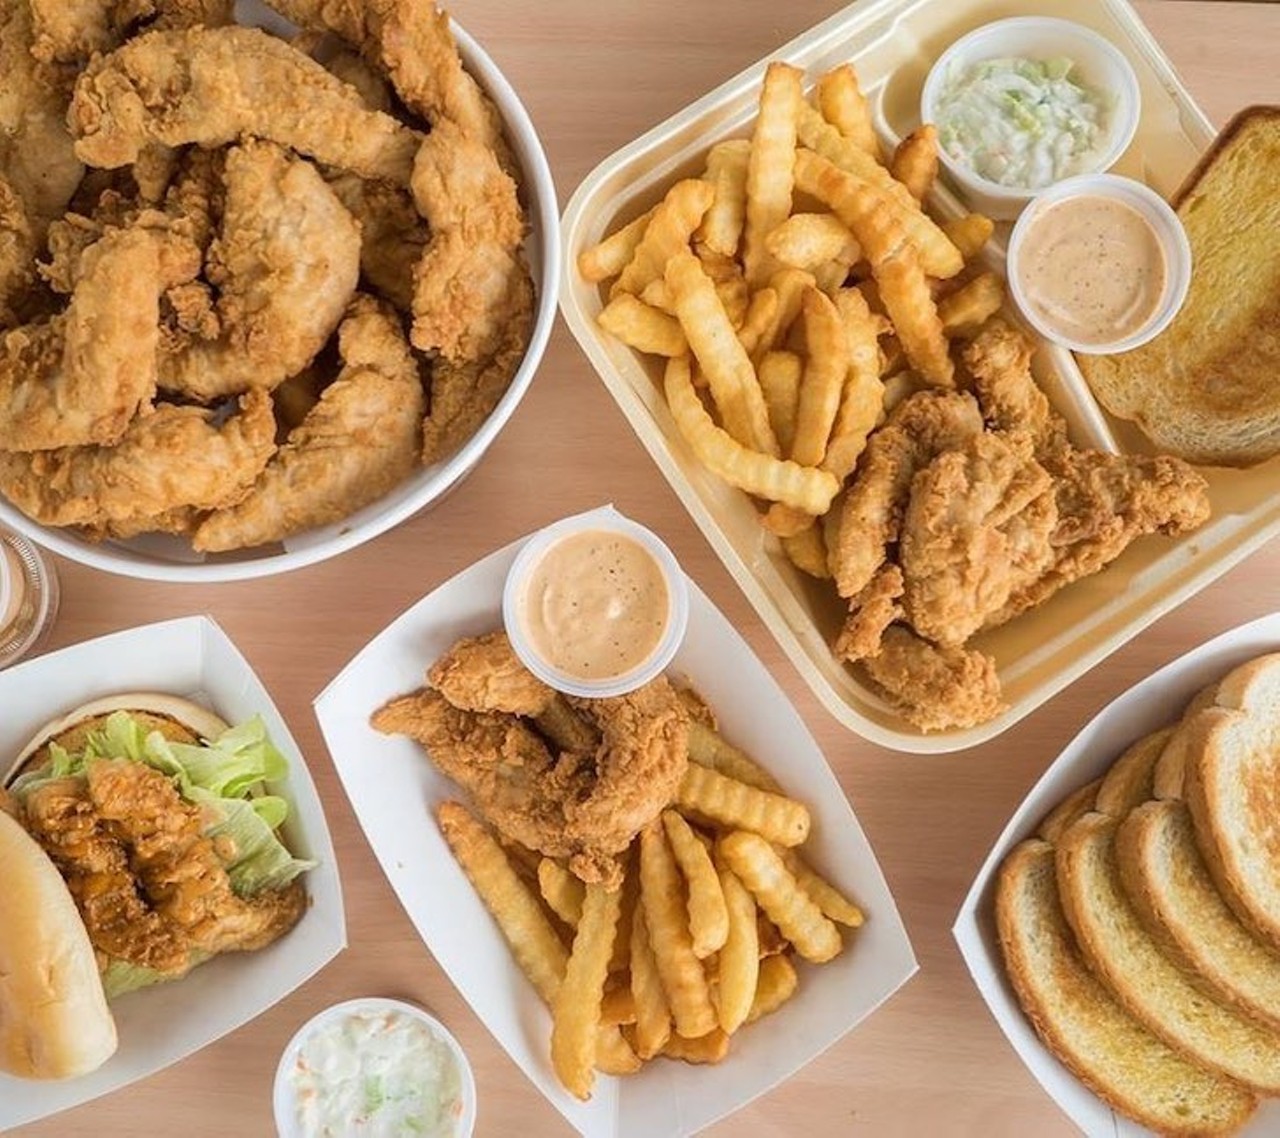 Guthrie&#146;s Chicken  
5224 S. Dale Mabry, Tampa.
We&#146;ve been itching for an opening date since we got wind that the award-winning chicken chain was coming to Tampa Bay. Now we can expect those golden fried delights in our hands by the fall.
Photo via Guthrie&#146;s Chicken/Facebook